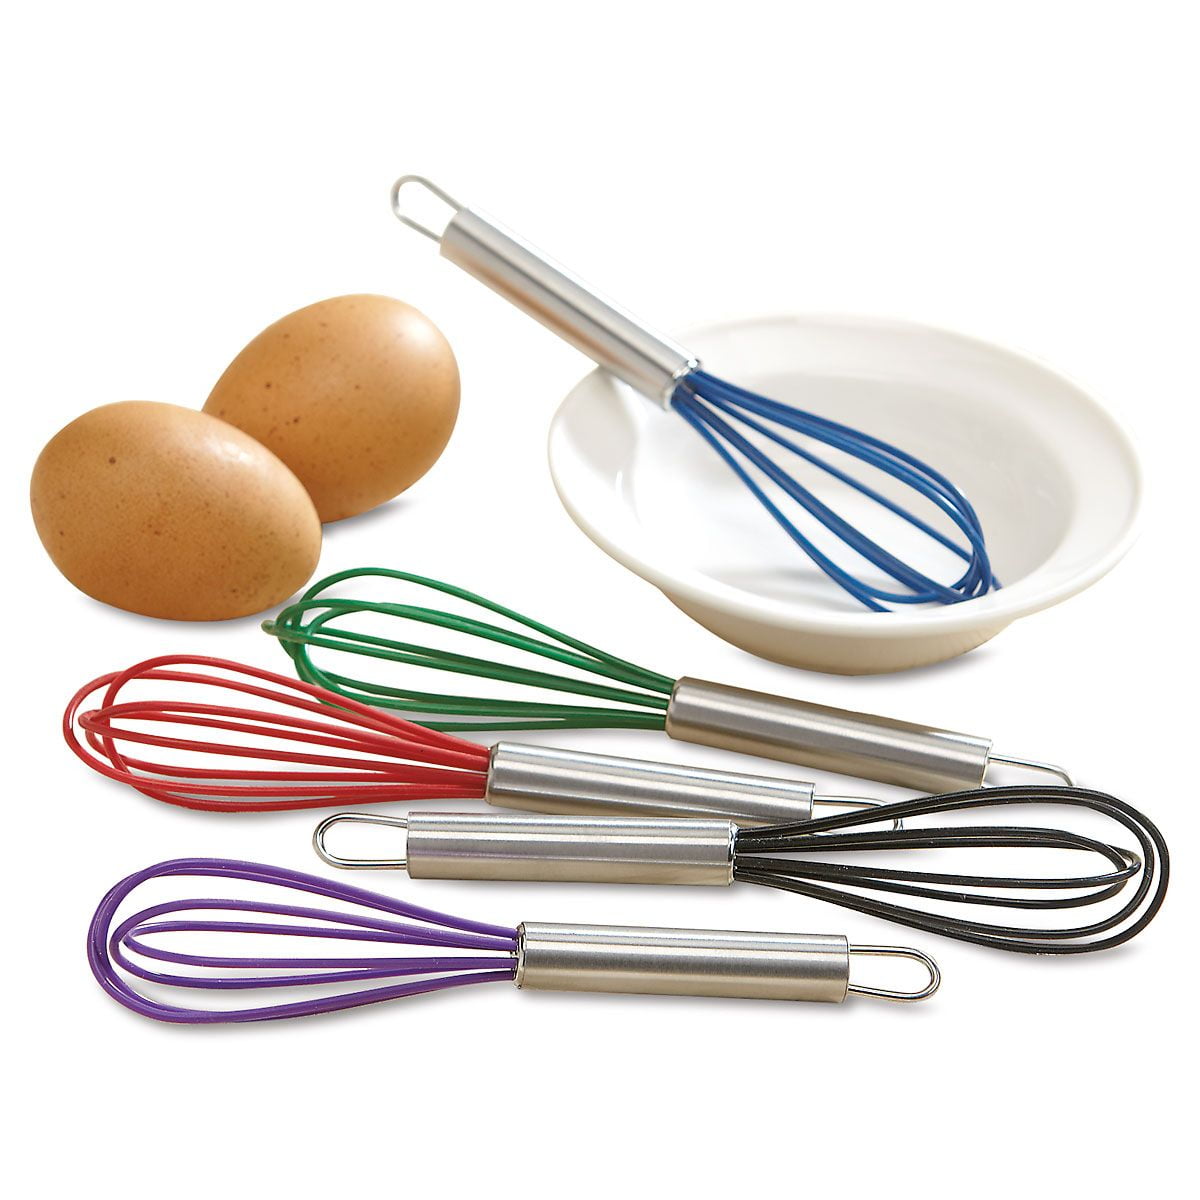 CASAKITCHN Silicone Whisk Set of 3, Very Sturdy 6 Wire Silicone Whisks for  Cooking Non Scratch Pots, Rubber Whisk, Enjoy Wisk Cooking Egg and Milk